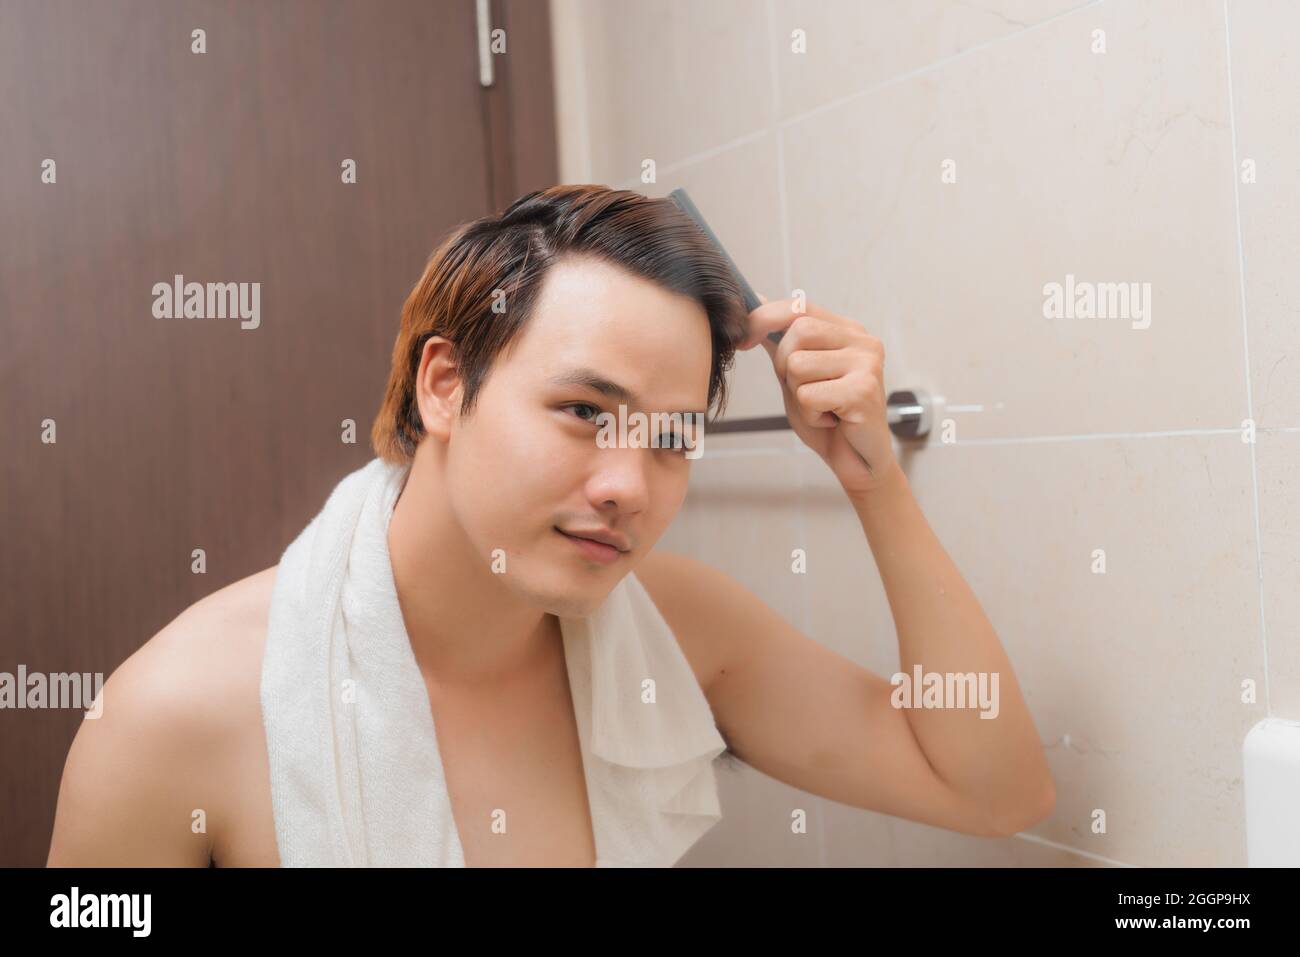 Reflection of Young Man Bushing Hair in Mirror Stock Photo